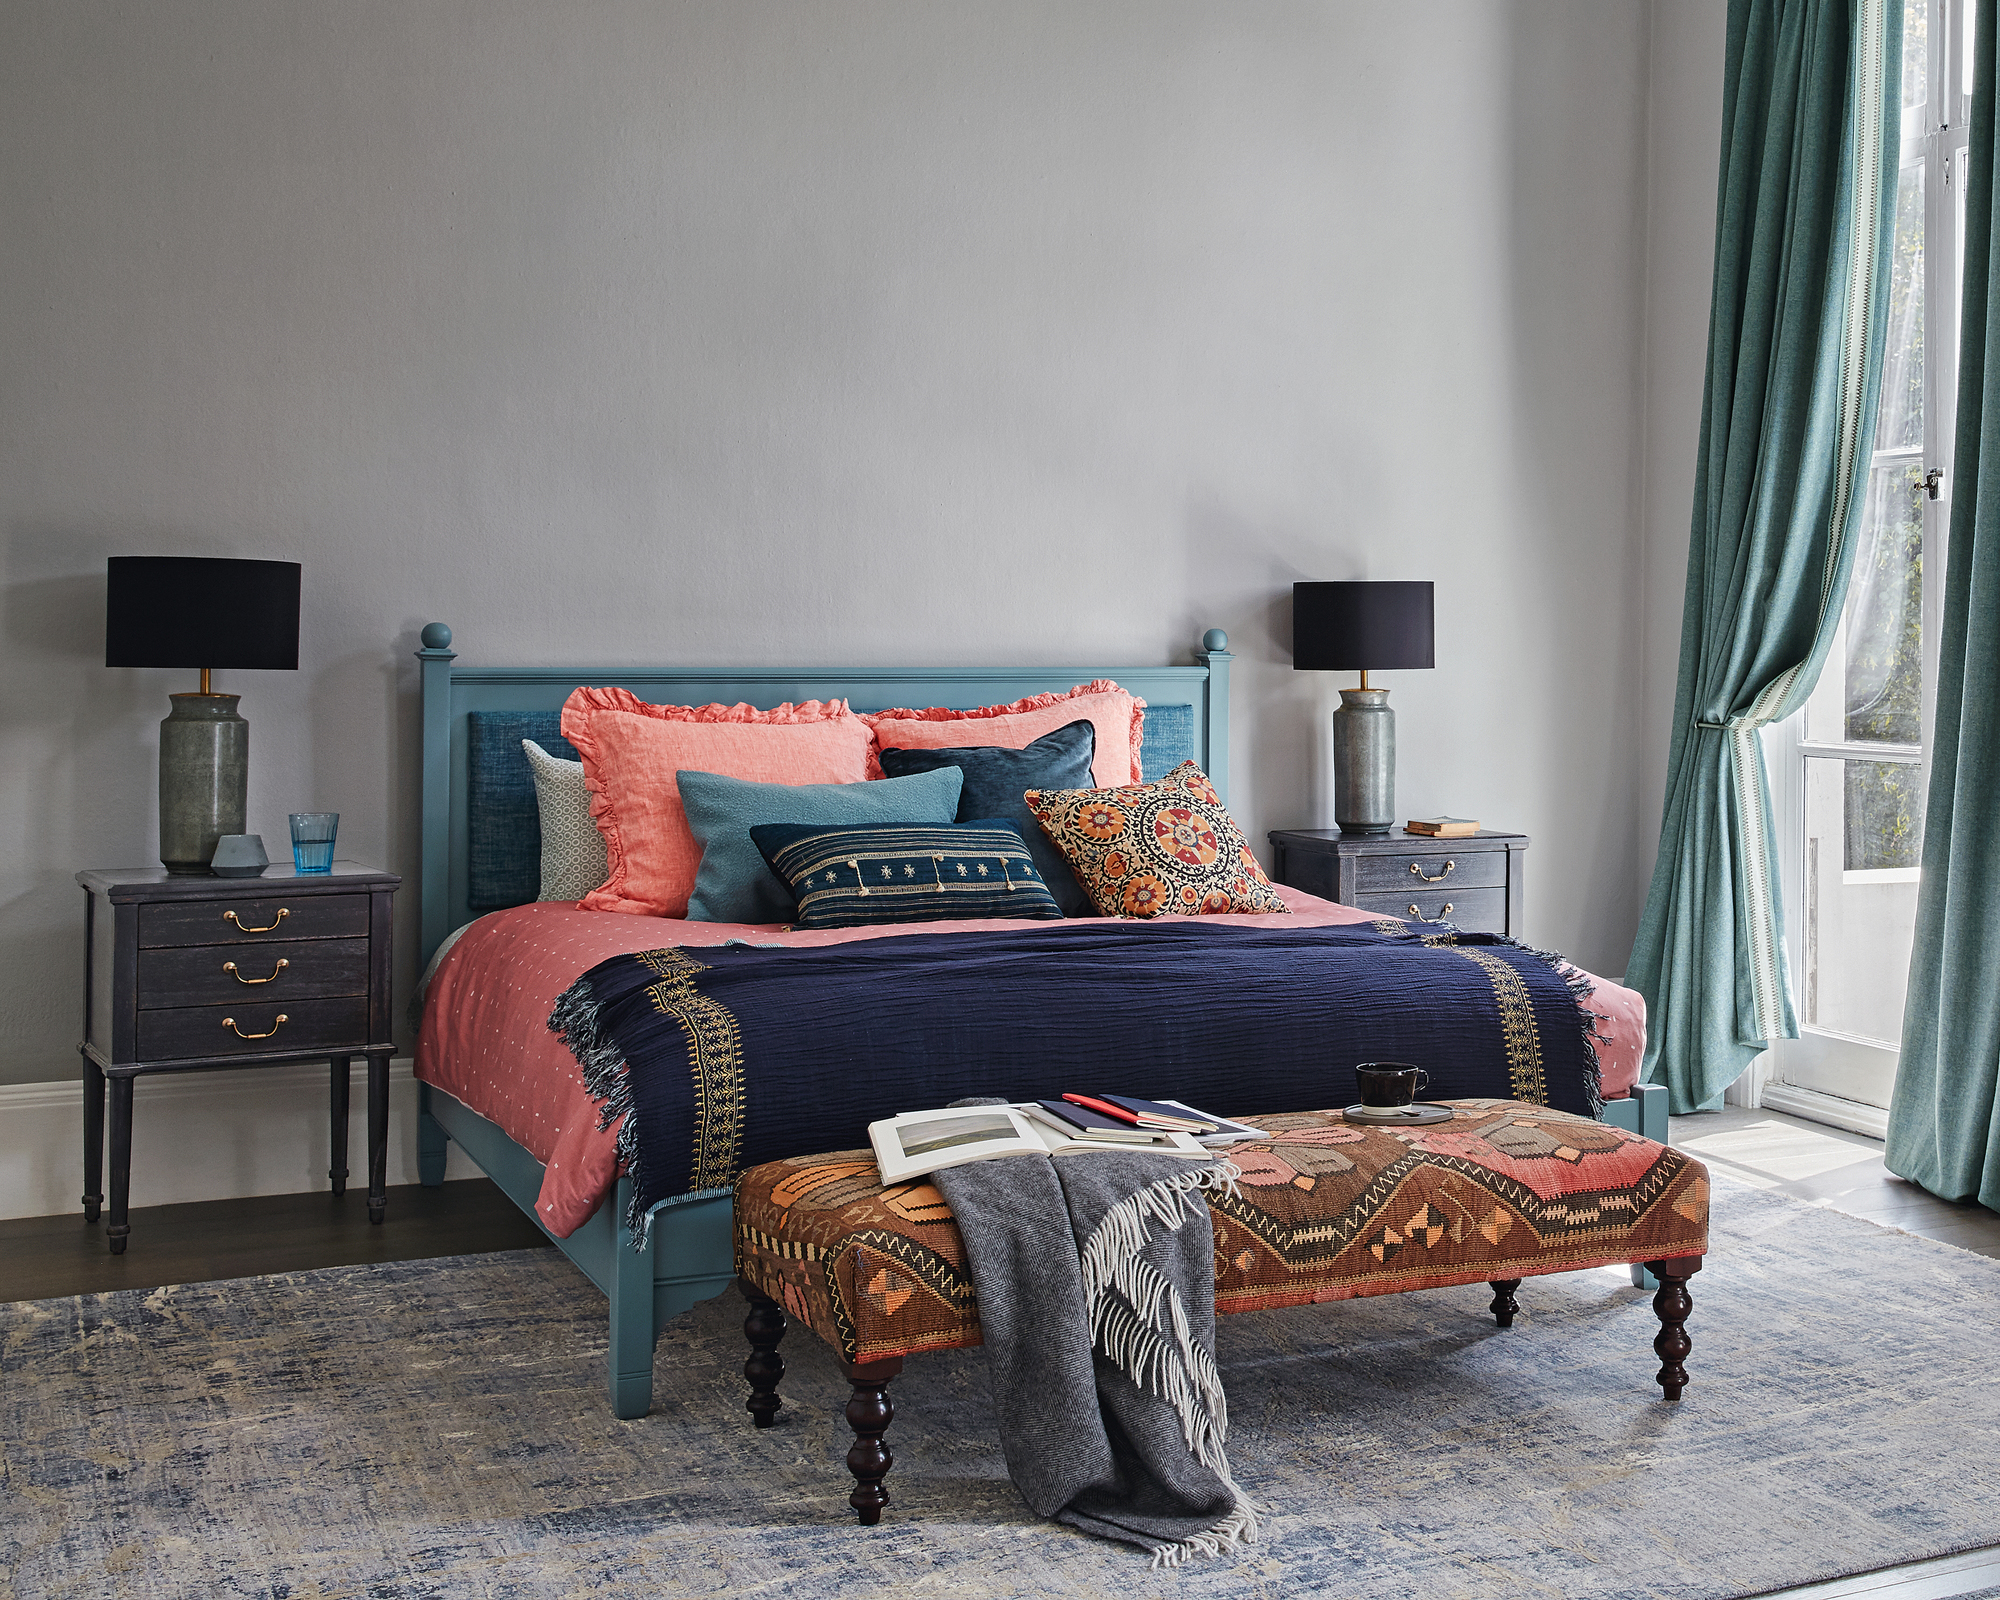 A grey bedroom idea with coral and blue colored bed linen